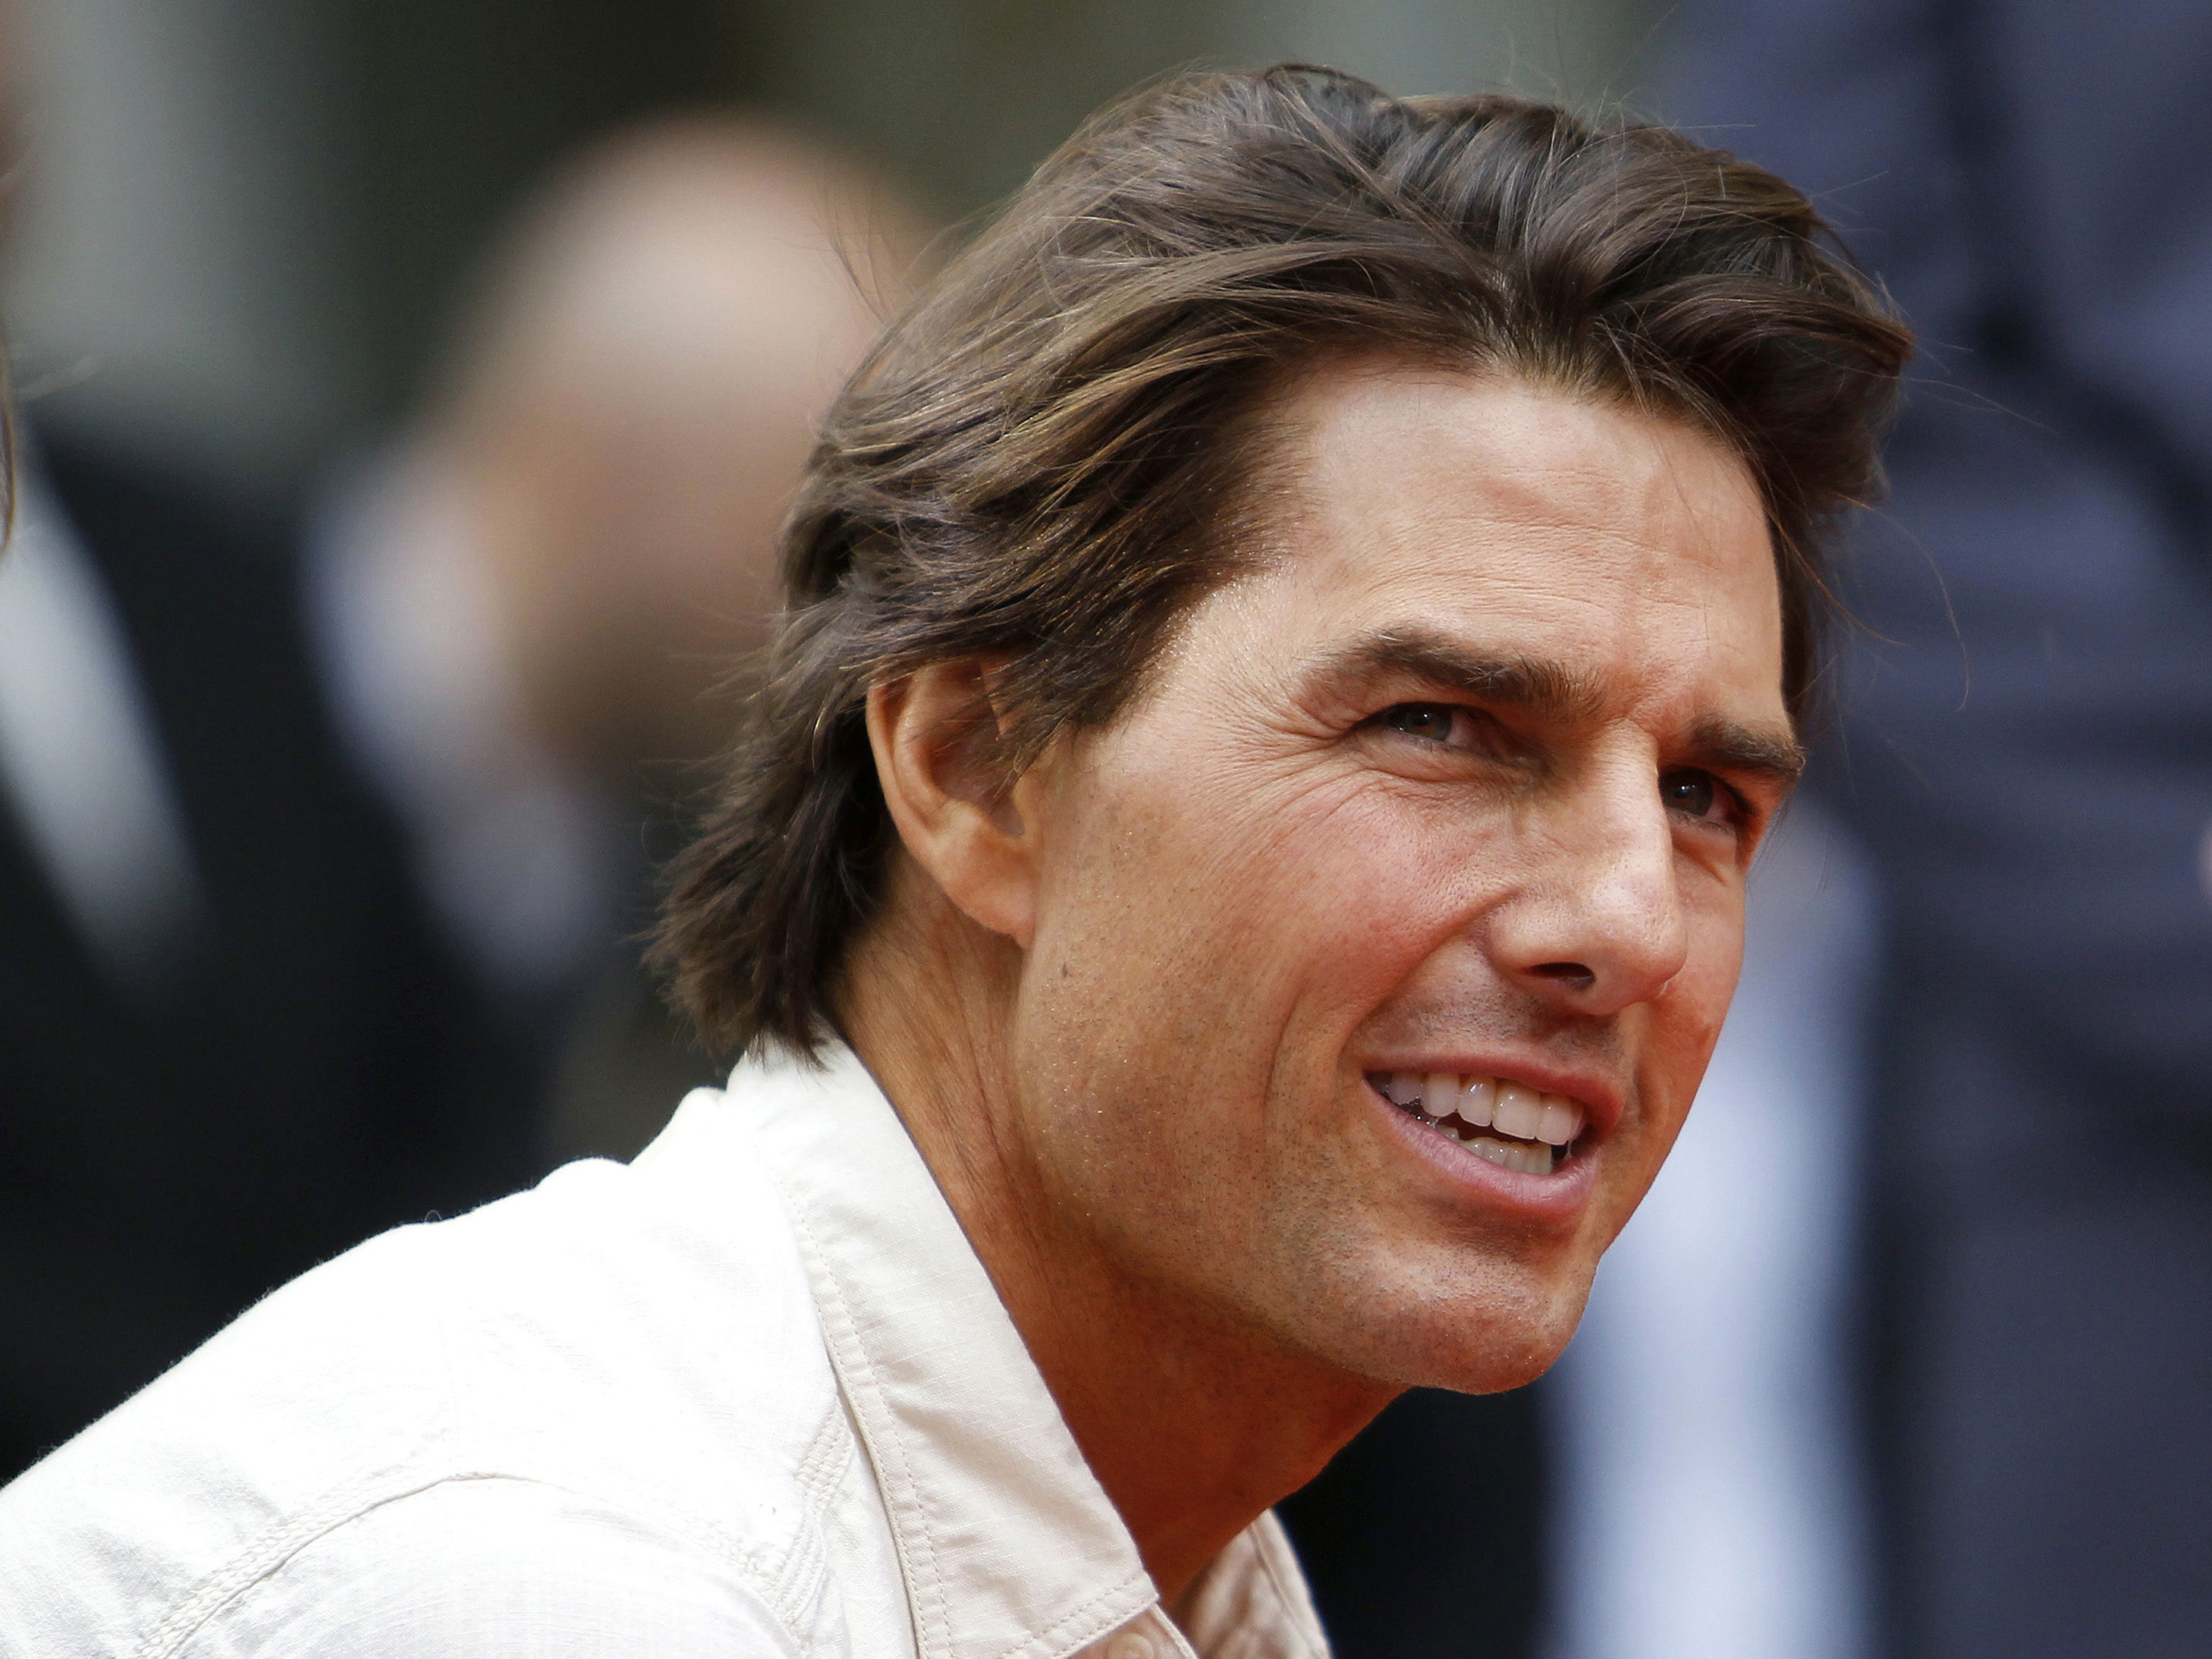 Tom Cruise Wallpapers. 